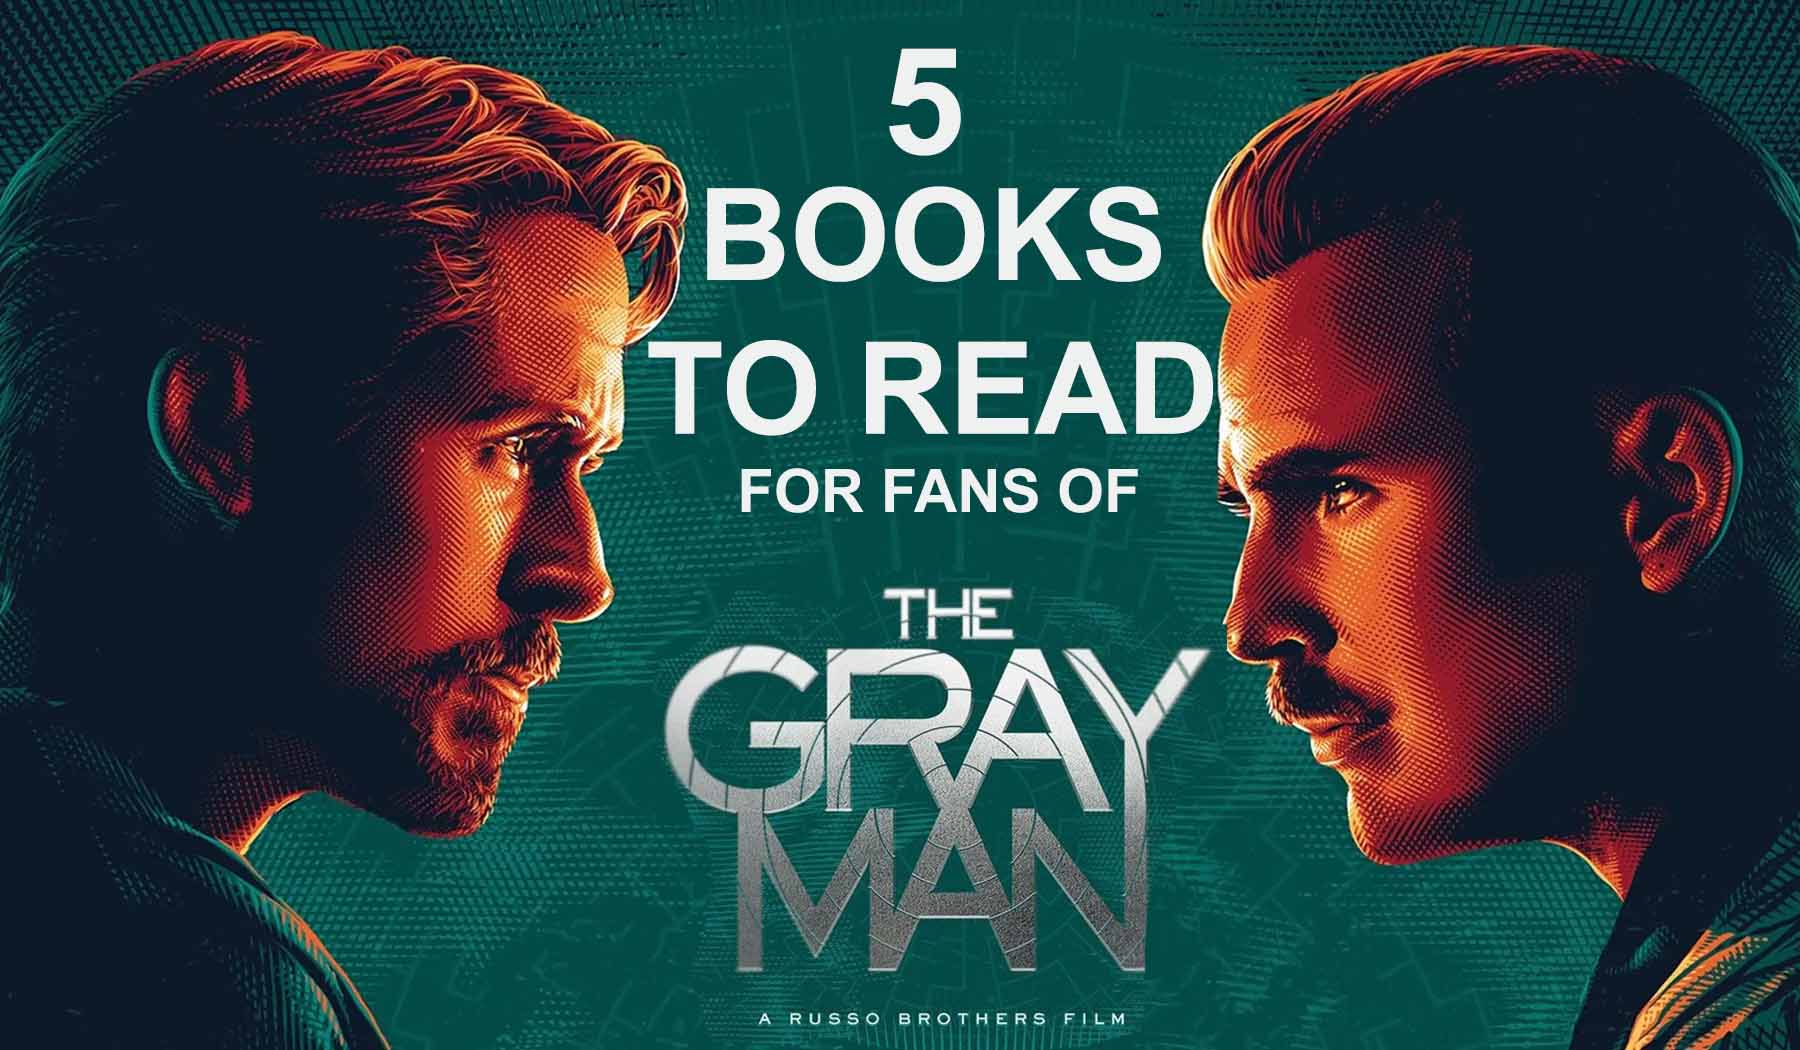 5 Books To Read For Fans Of The Gray Man